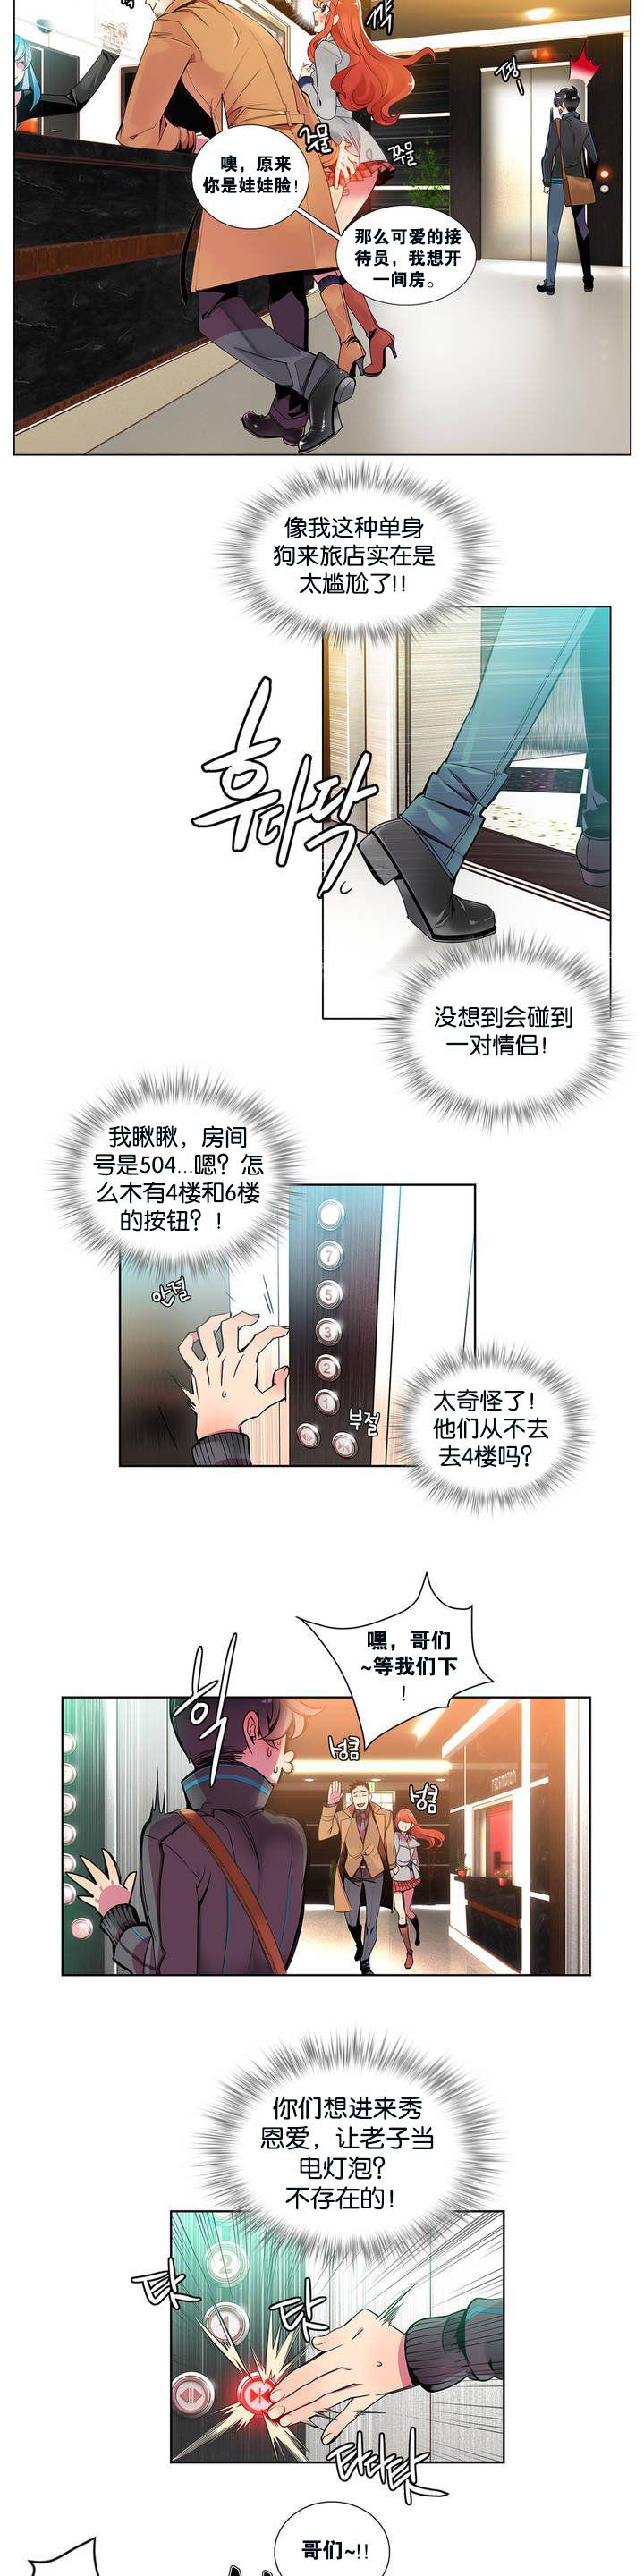 Hot Teen [Juder] 莉莉丝的脐带(Lilith`s Cord) Ch.1-24 [Chinese] Hidden Camera - Page 8